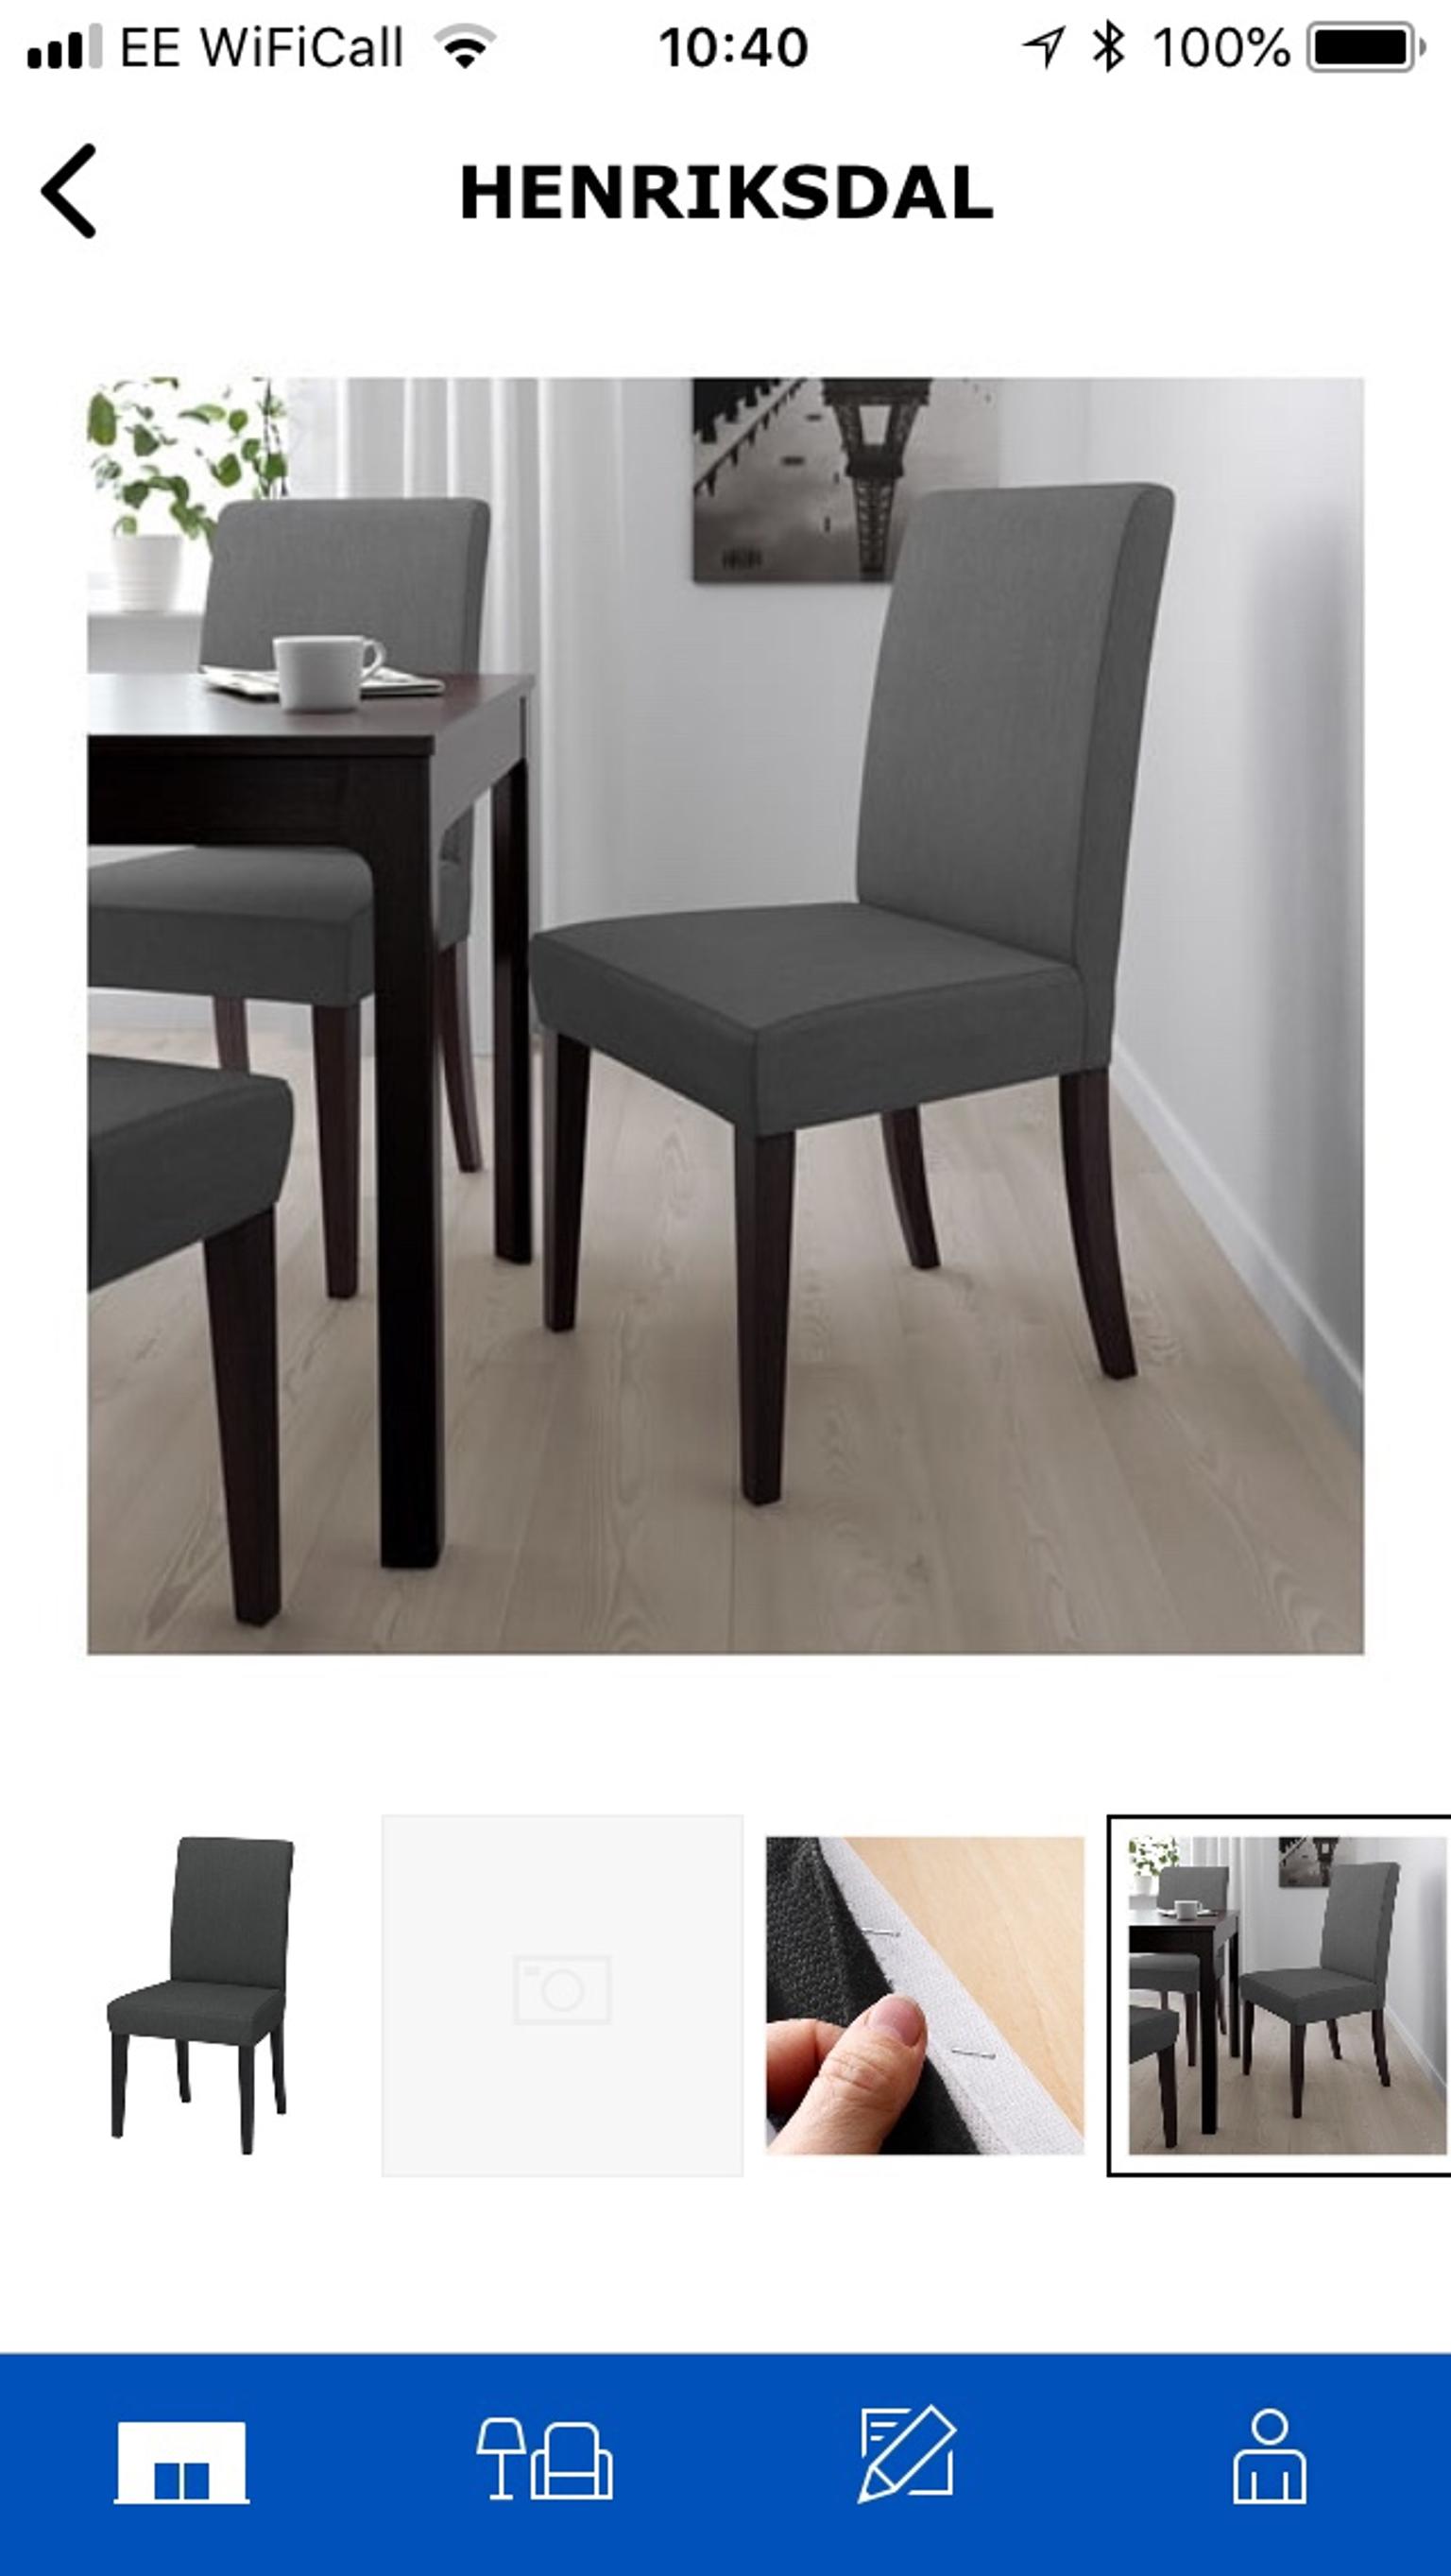 Ikea Henriksdal Set Of 4 Dining Chairs, Grey Dining Chairs Set Of 4 Ikea